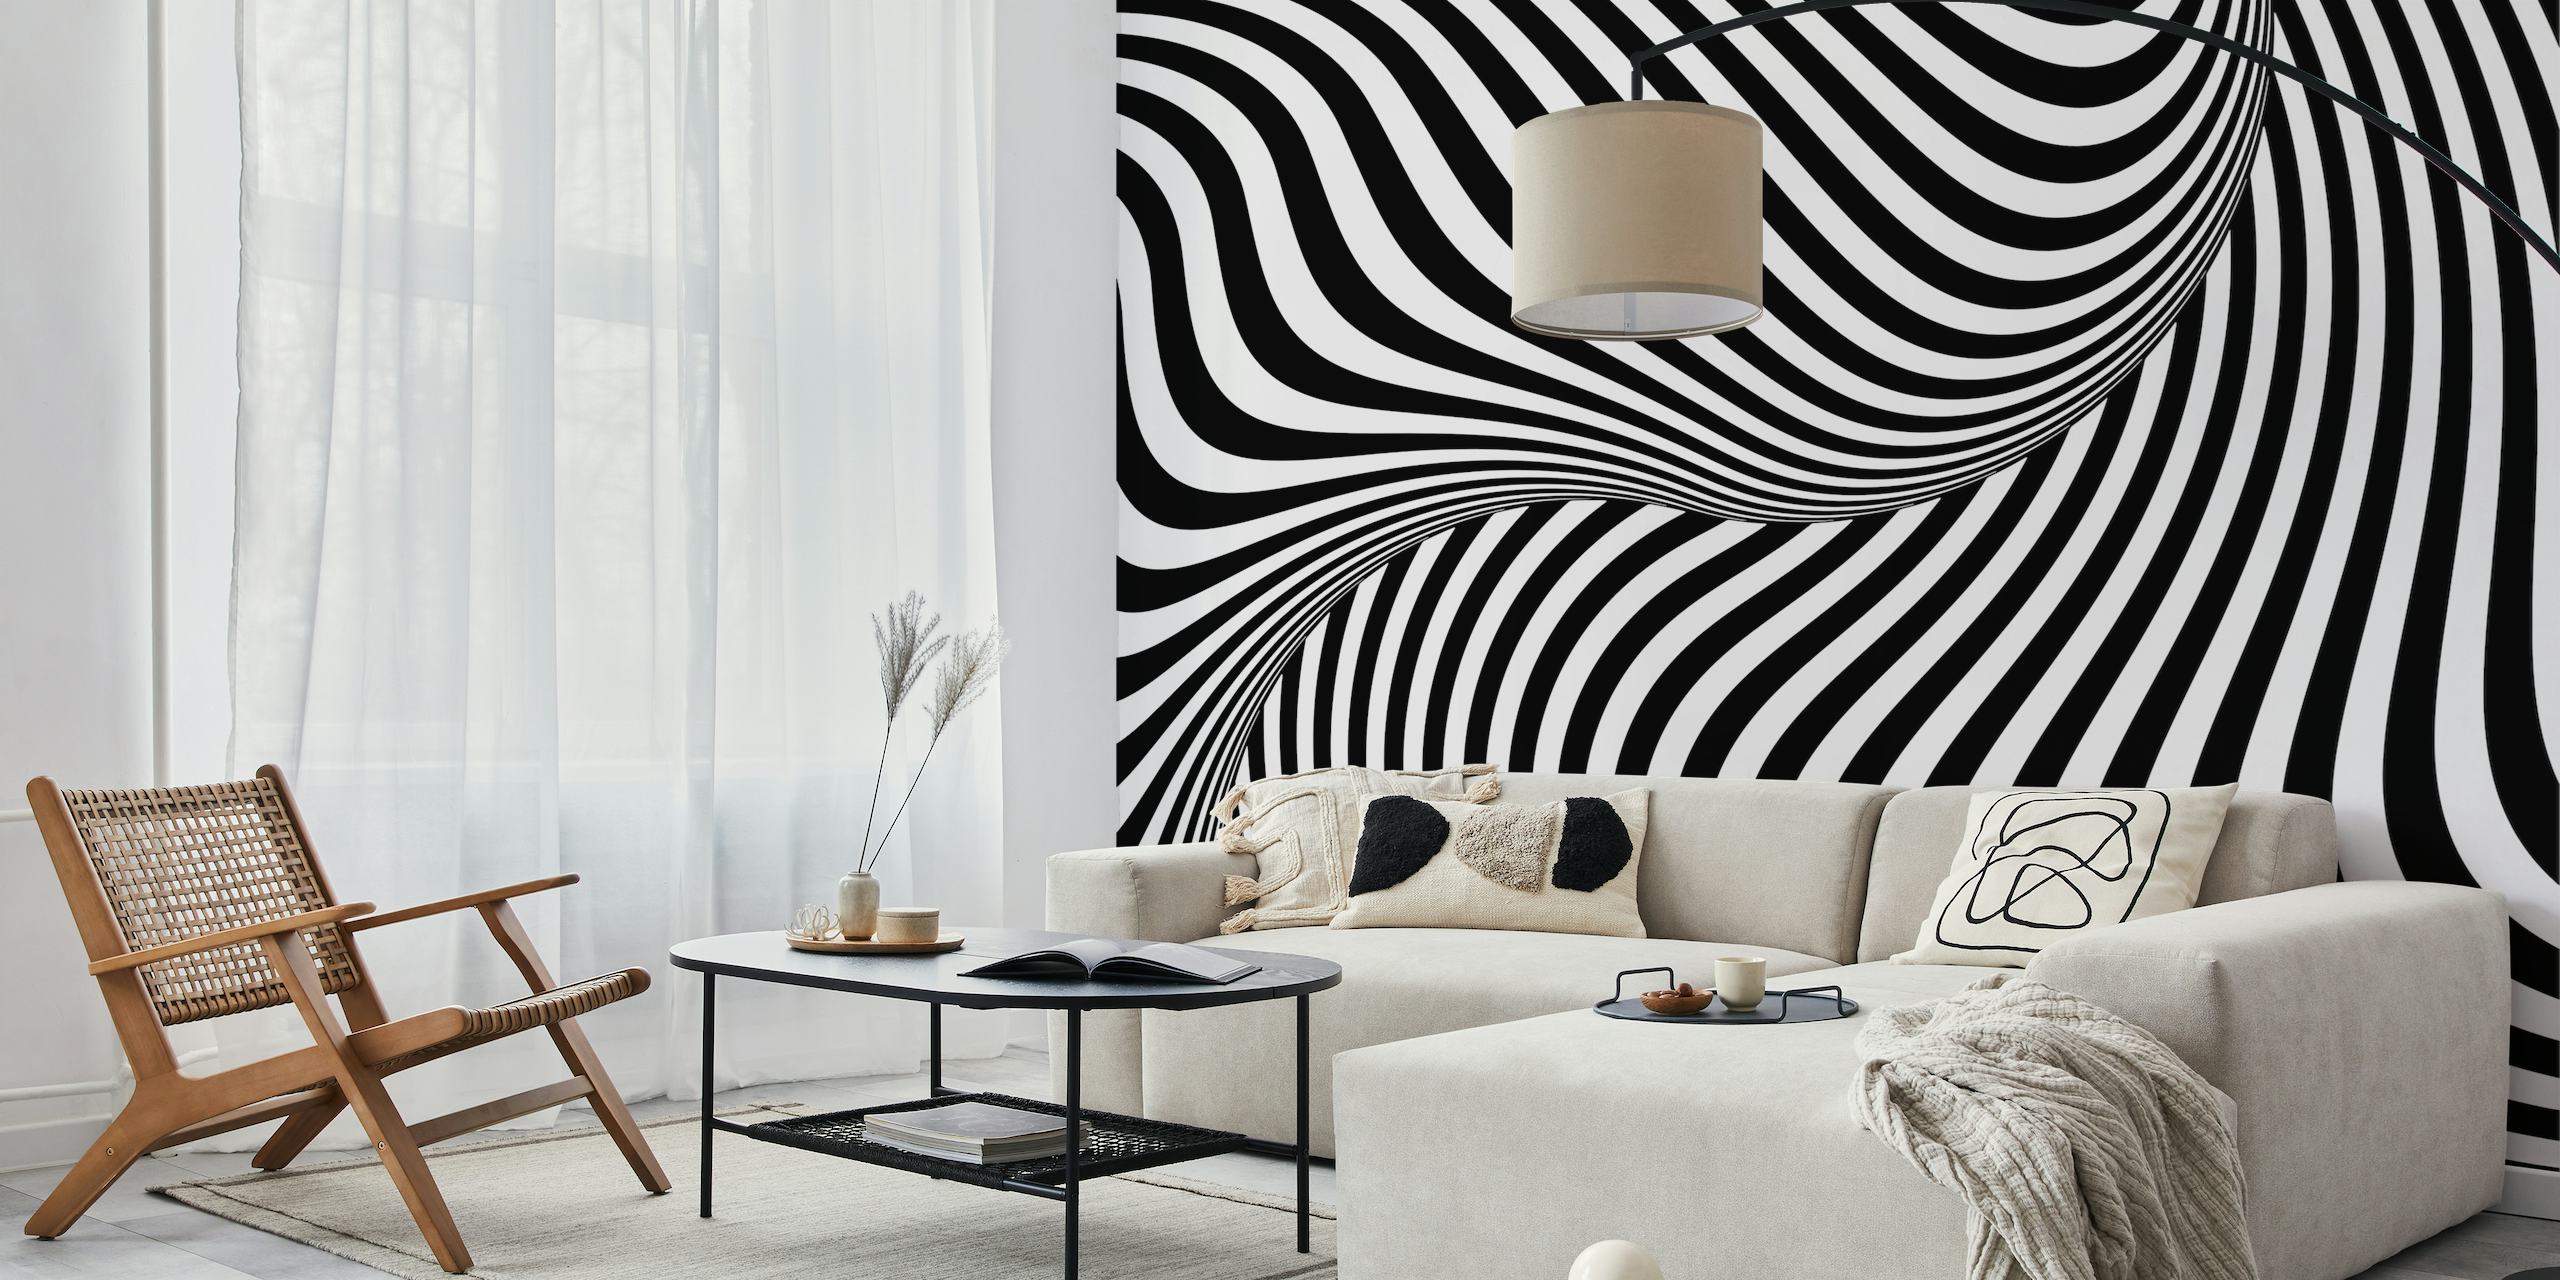 Monochrome op-art wall mural with hypnotic black and white curves